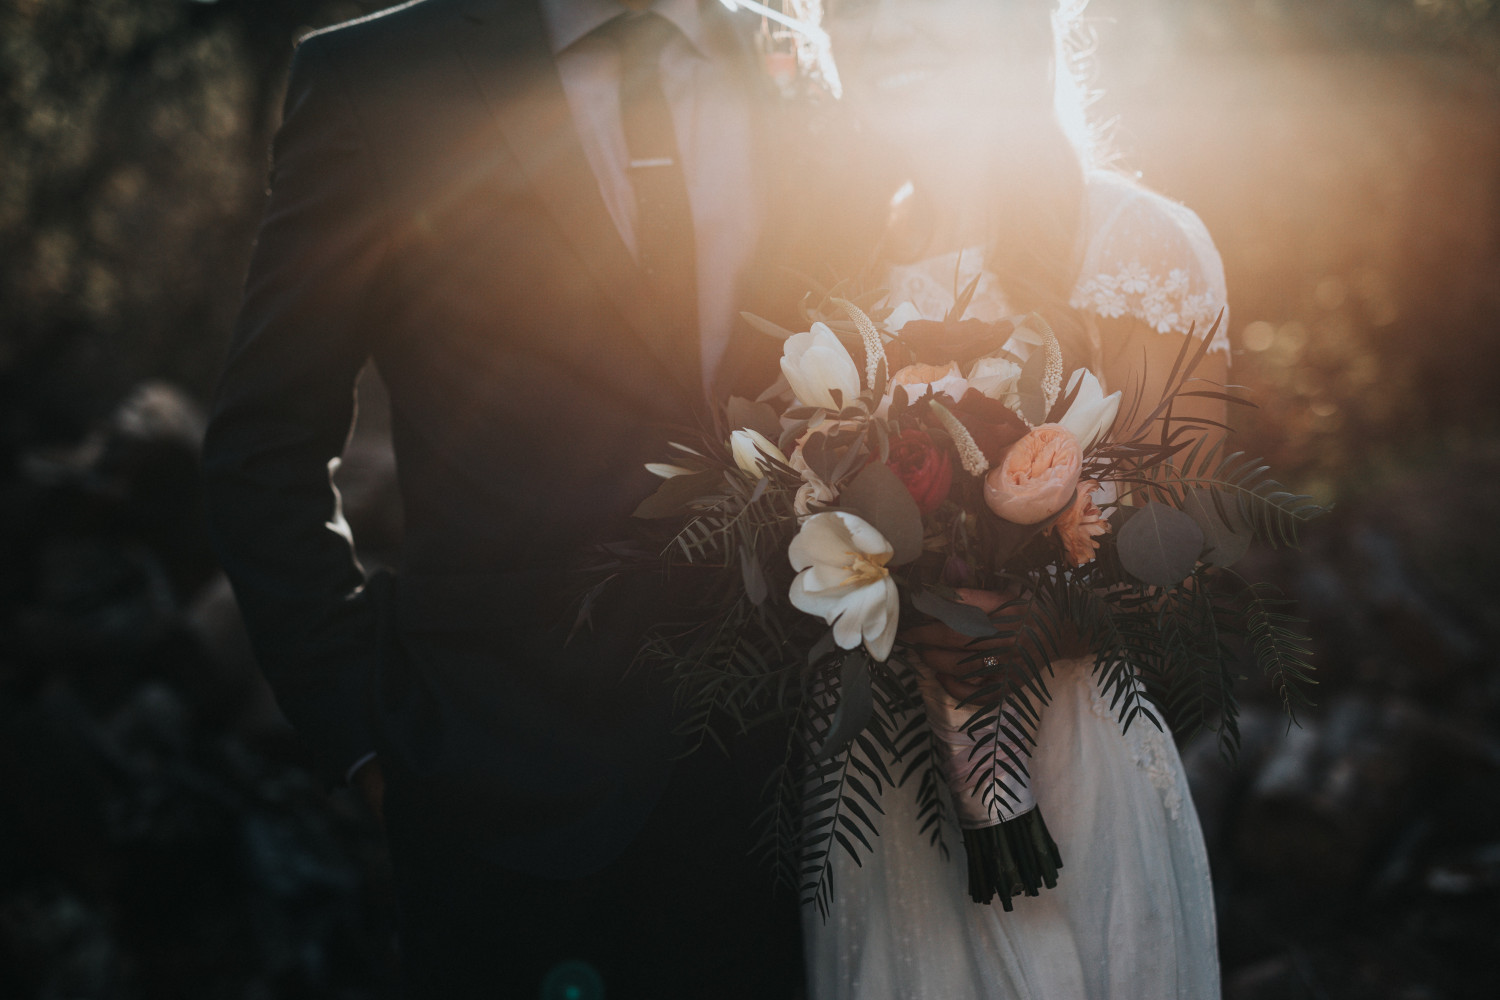 Image of a bride and groom holding a bouquet of flowers